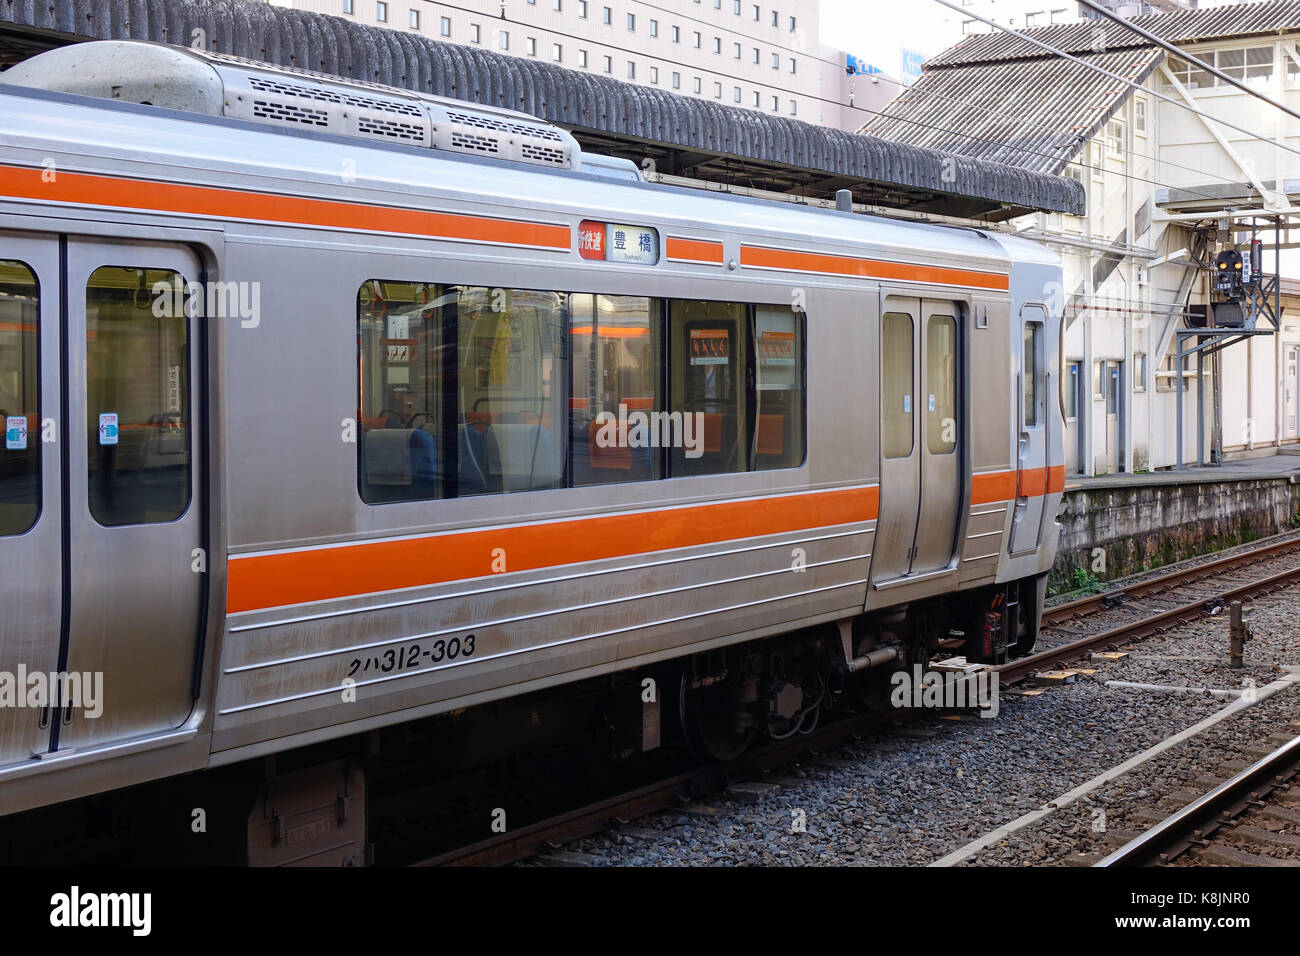 Tokyo, Japan - Dec 25, 2015. A JR train stopping at Hachioji railway station in Tokyo, Japan. Railways are the most important means of passenger trans Stock Photo